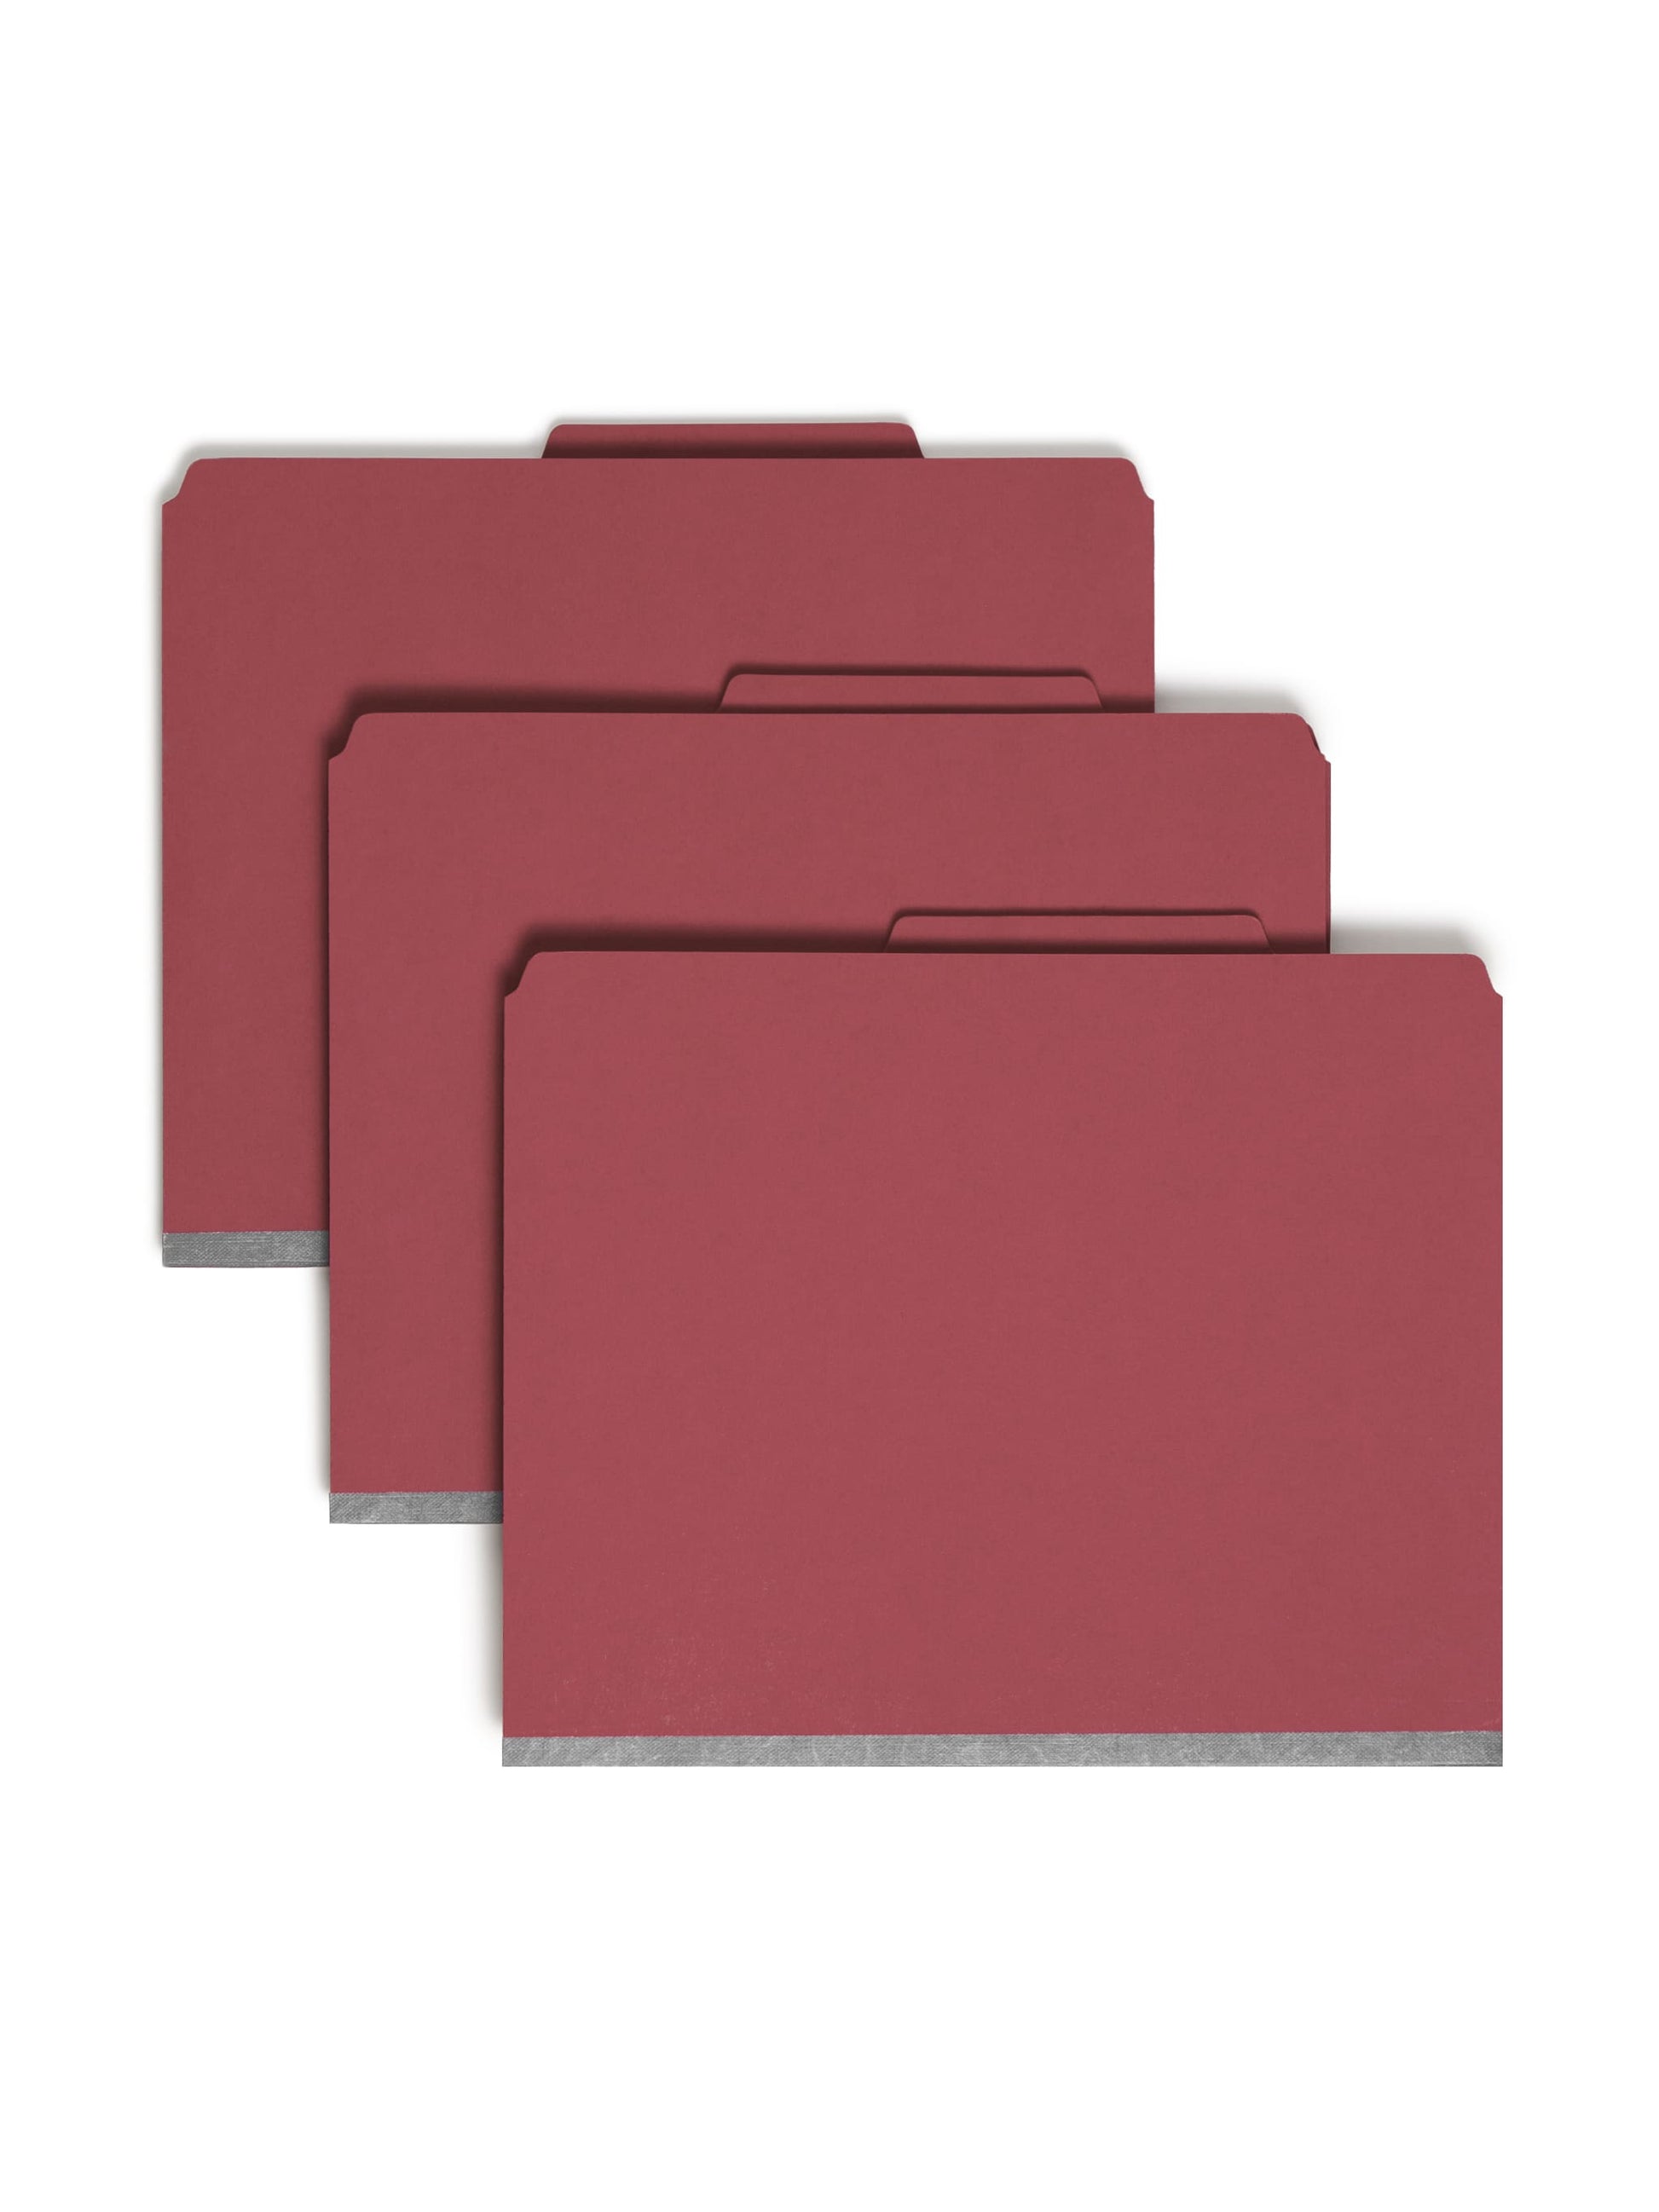 SafeSHIELD® Pressboard Classification File Folders, 3 Dividers, 3 inch Expansion, 2/5-Cut Tab, Bright Red Color, Letter Size, Set of 0, 30086486140950